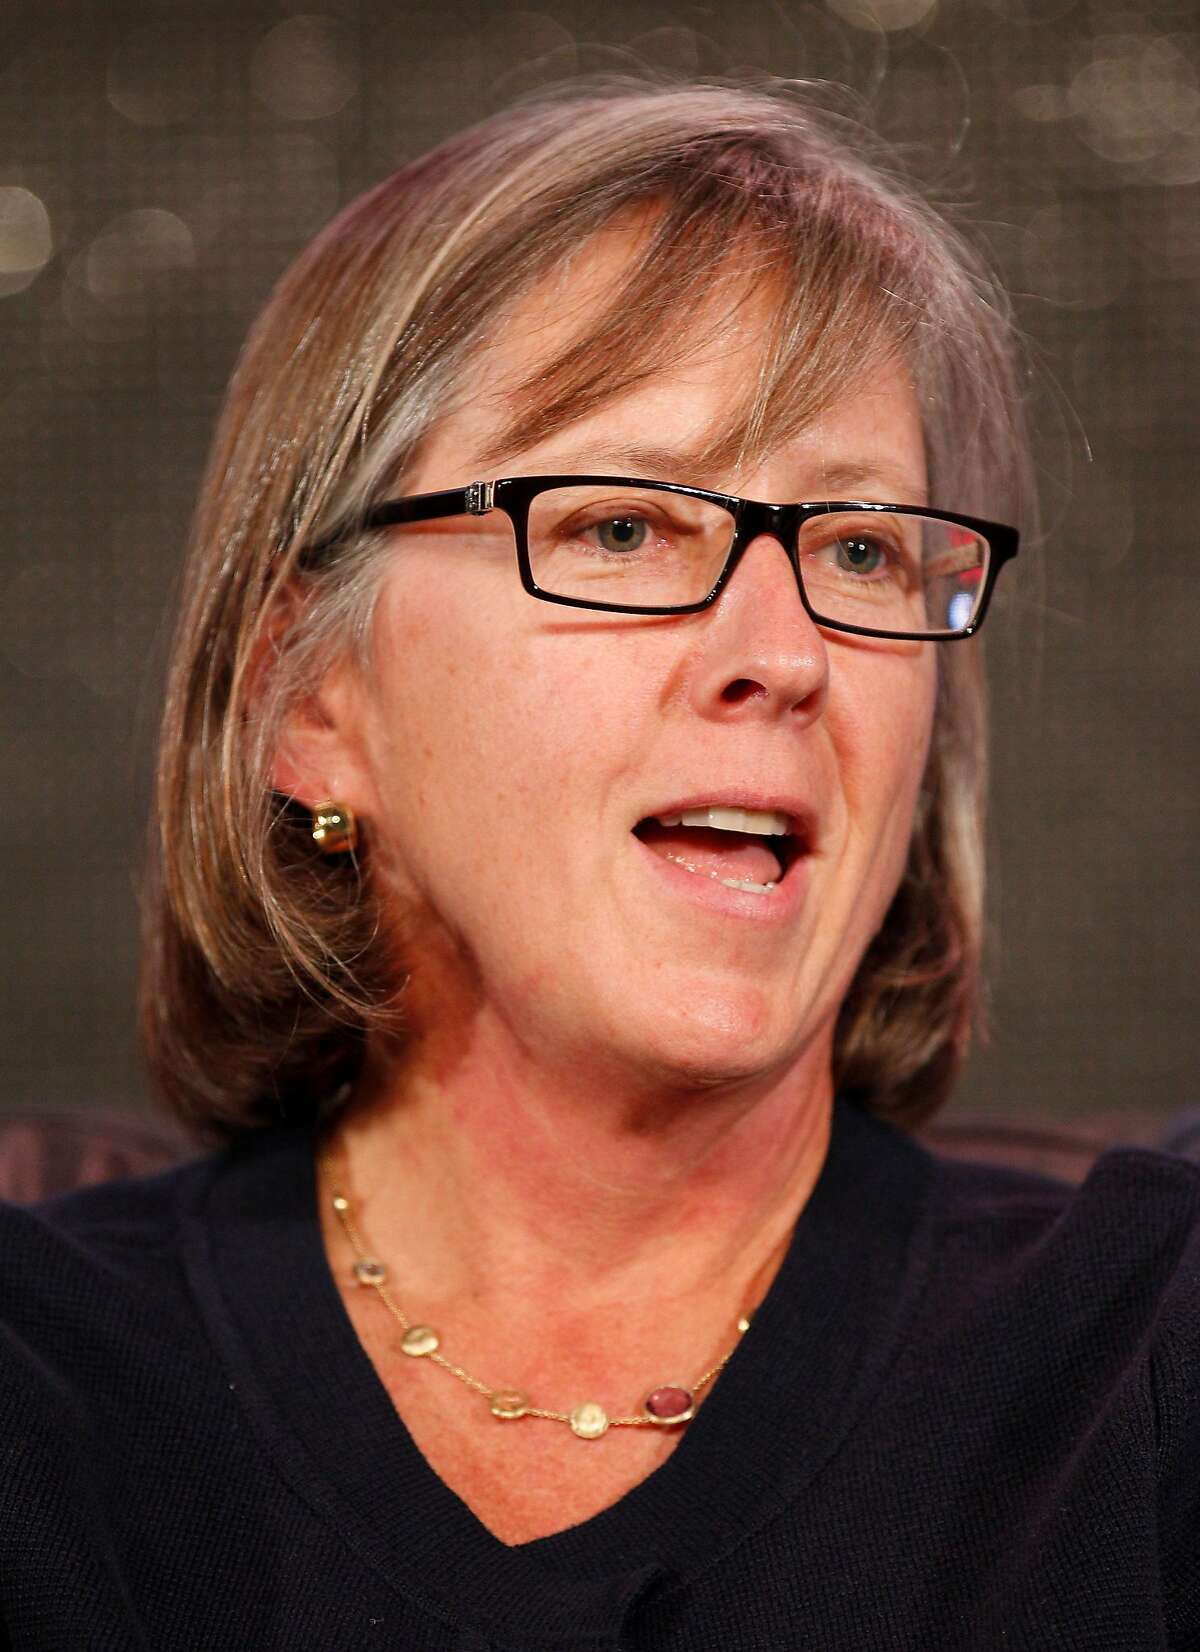 Mary Meeker, partner at Kleiner Perkins Caufield & Byers, speaks at the Web 2.0 Summit in San Francisco, California, U.S., on Tuesday, Oct. 18, 2011. The conference brings together 1,000 senior executives from the worlds of technology, media, finance, telecommunications, entertainment, and the Internet. Photographer: Tony Avelar/Bloomberg *** Local Caption *** Mary Meeker